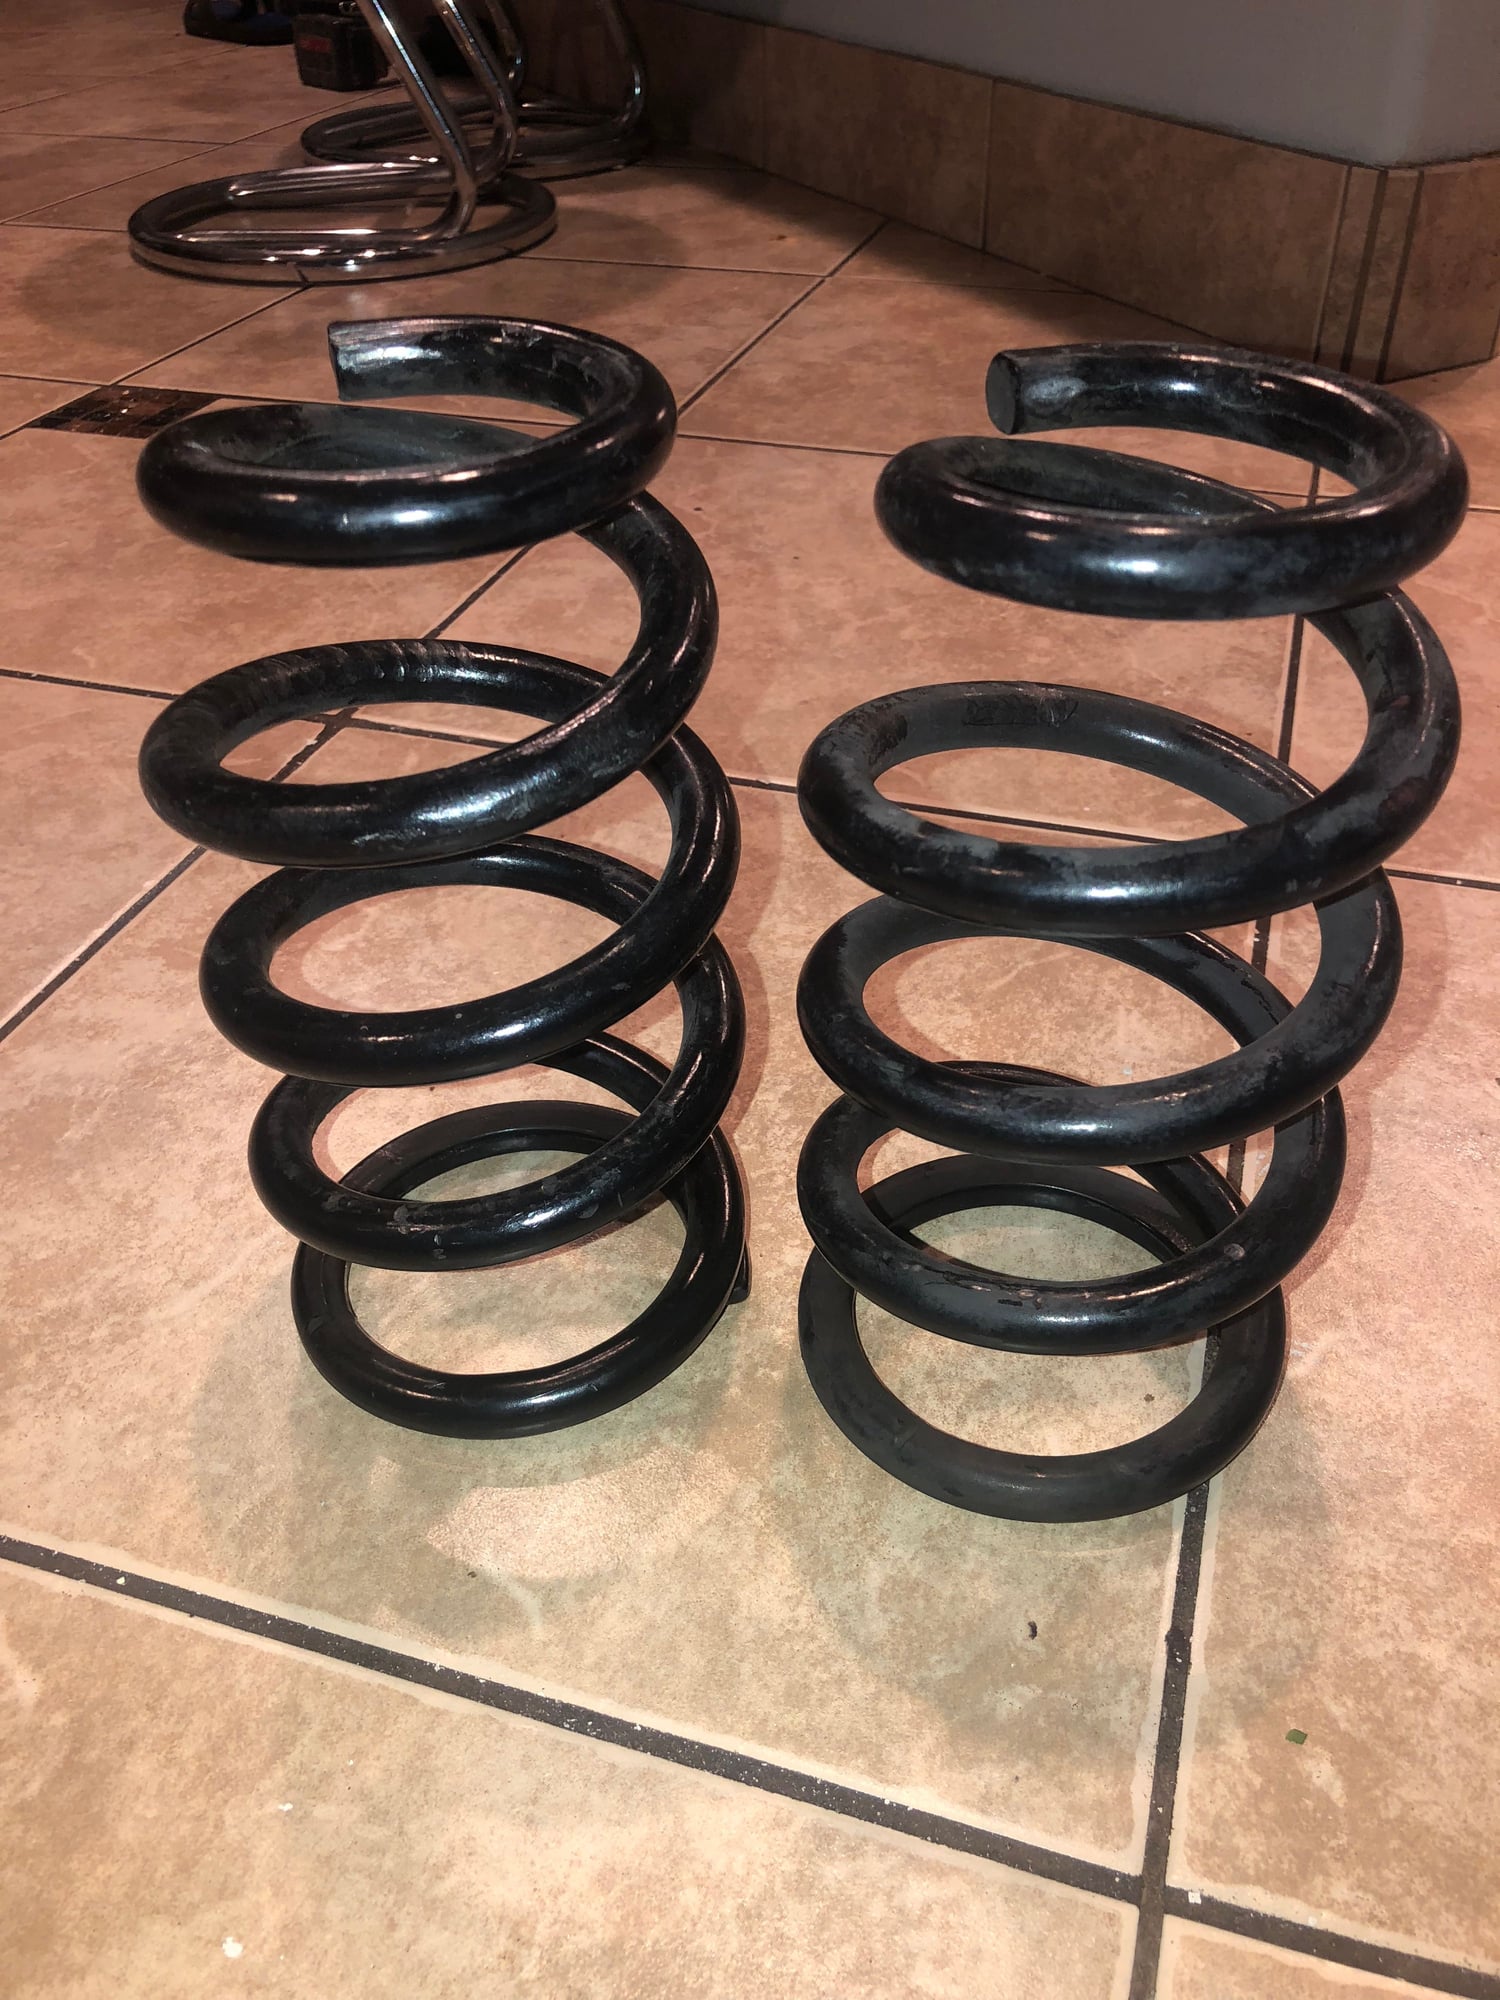 Steering/Suspension - Lexus ISF swift and OEM springs for sale - New - 2008 to 2014 Lexus IS F - Portland, OR 97222, United States